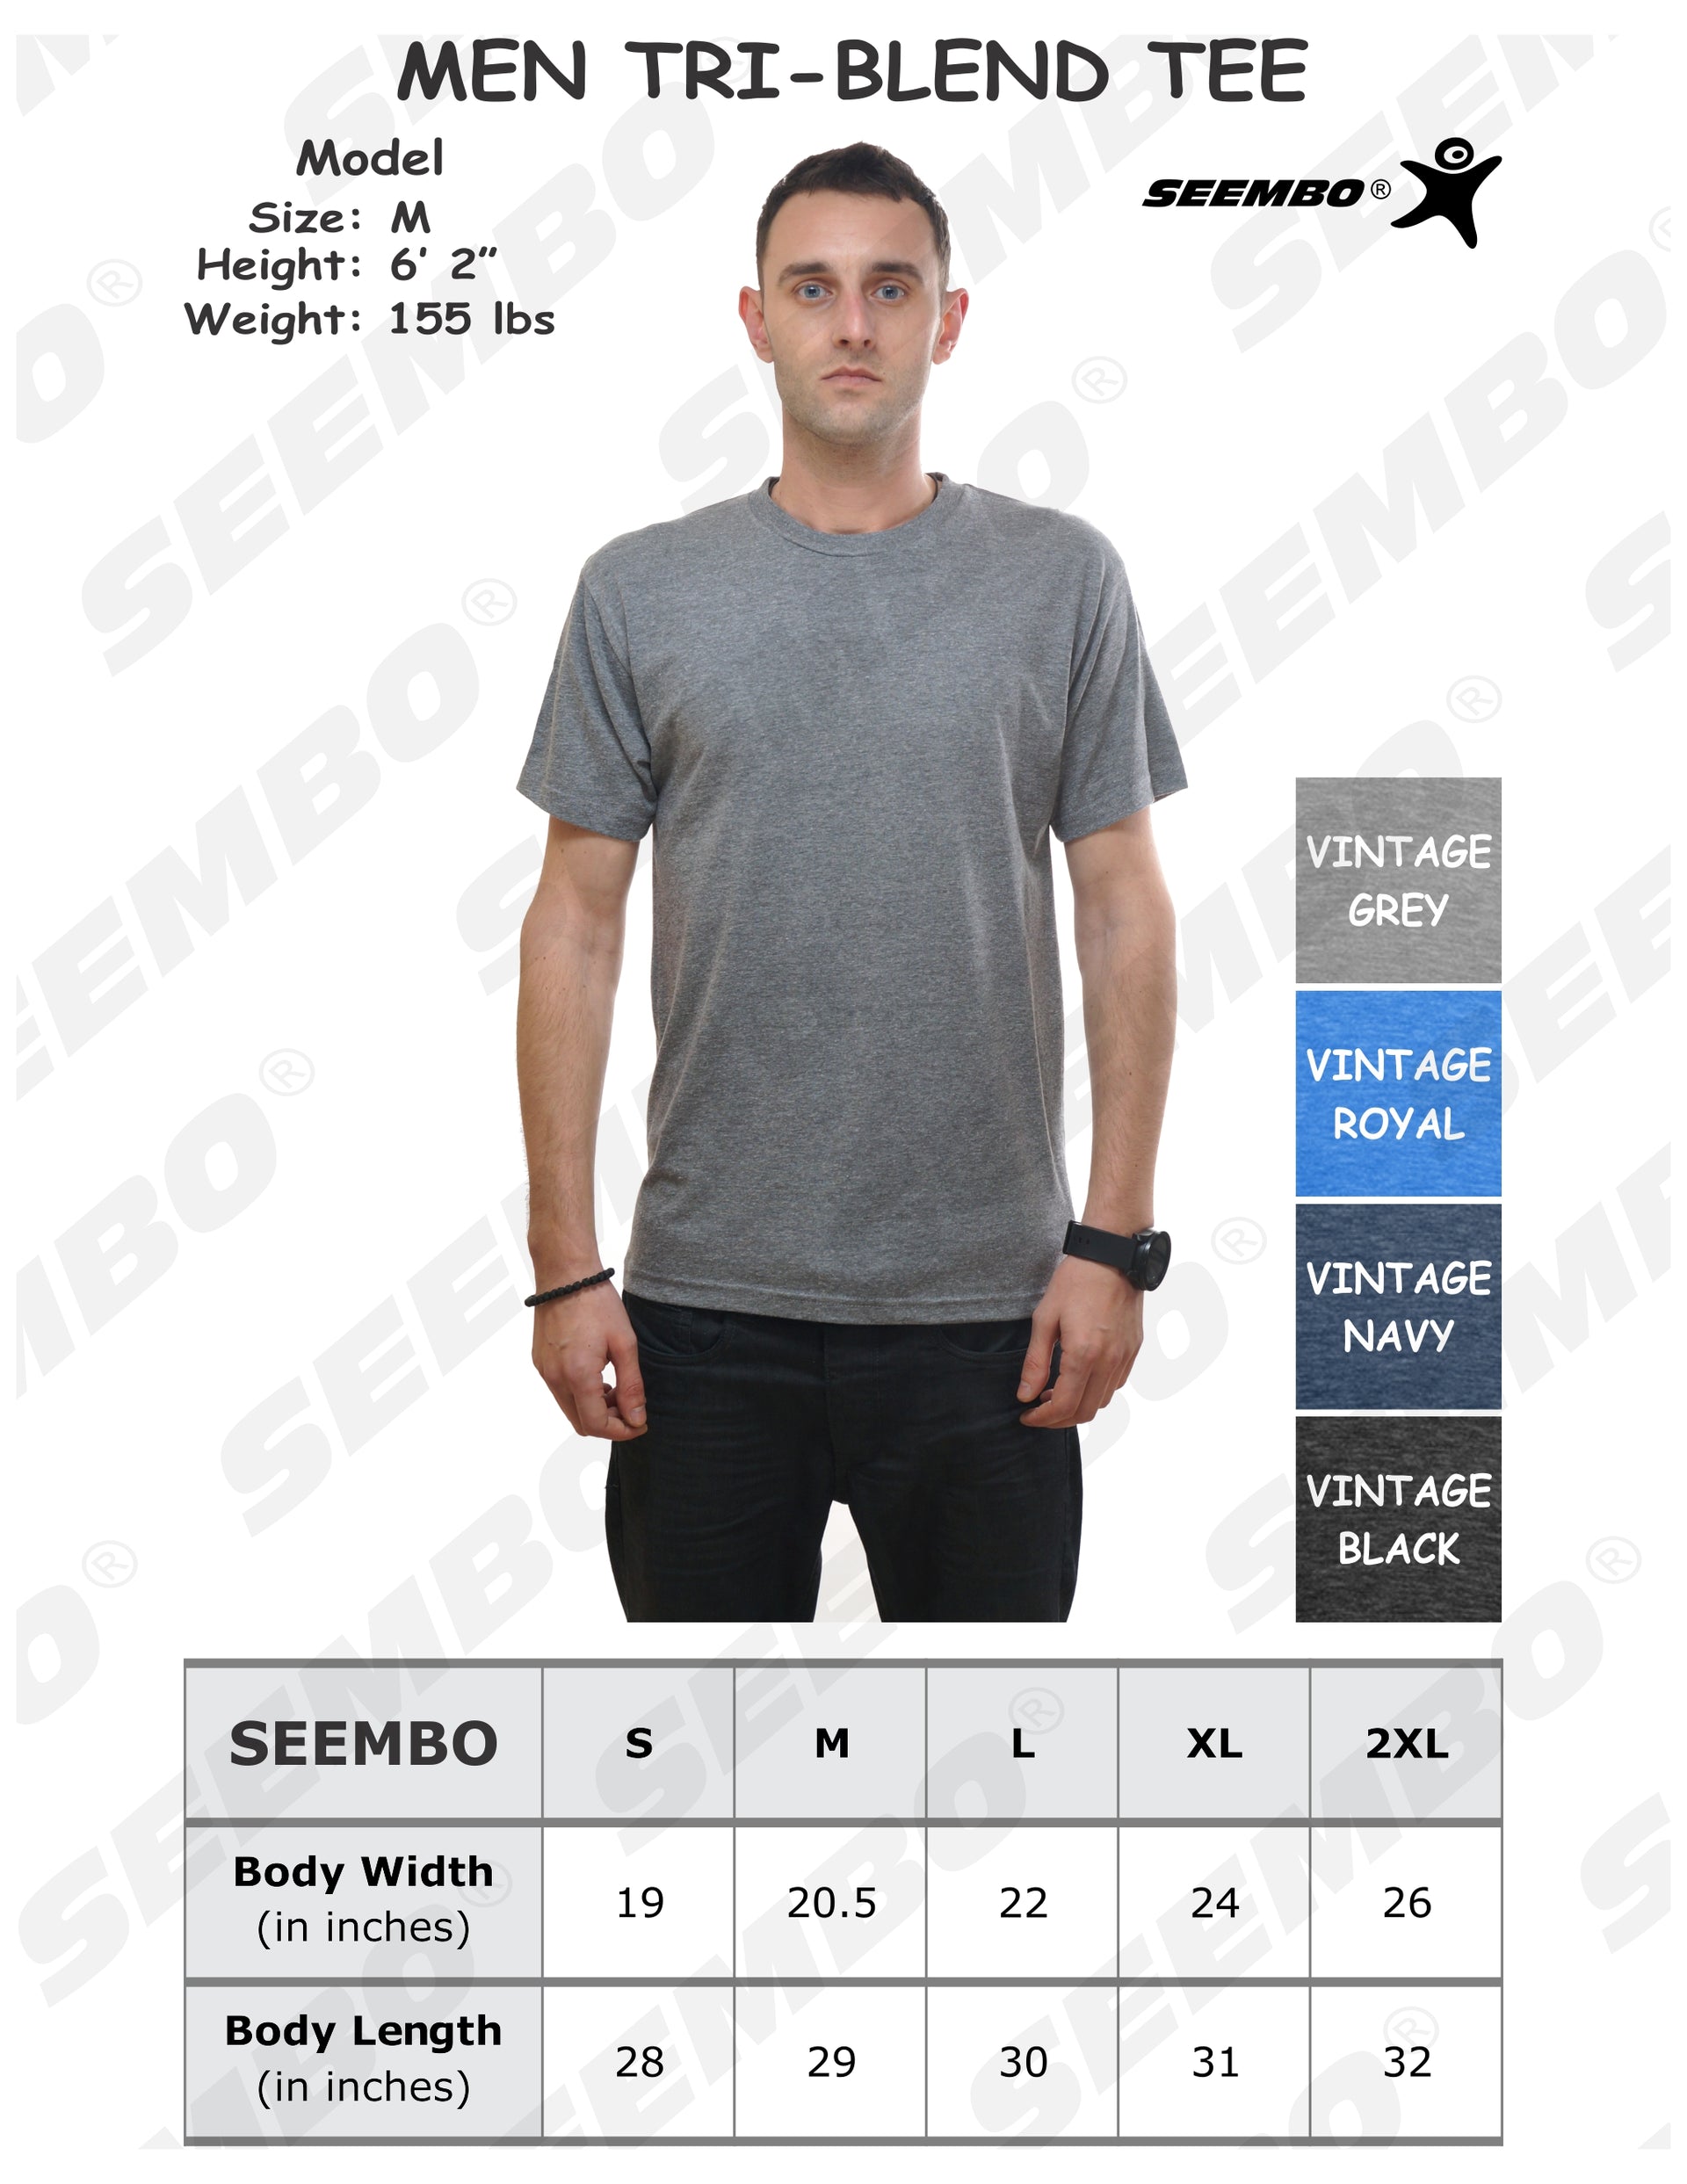 SEEMBO-Size-Chart-Men-Unisex-Tri-Blend-T-Shirt-with-colors